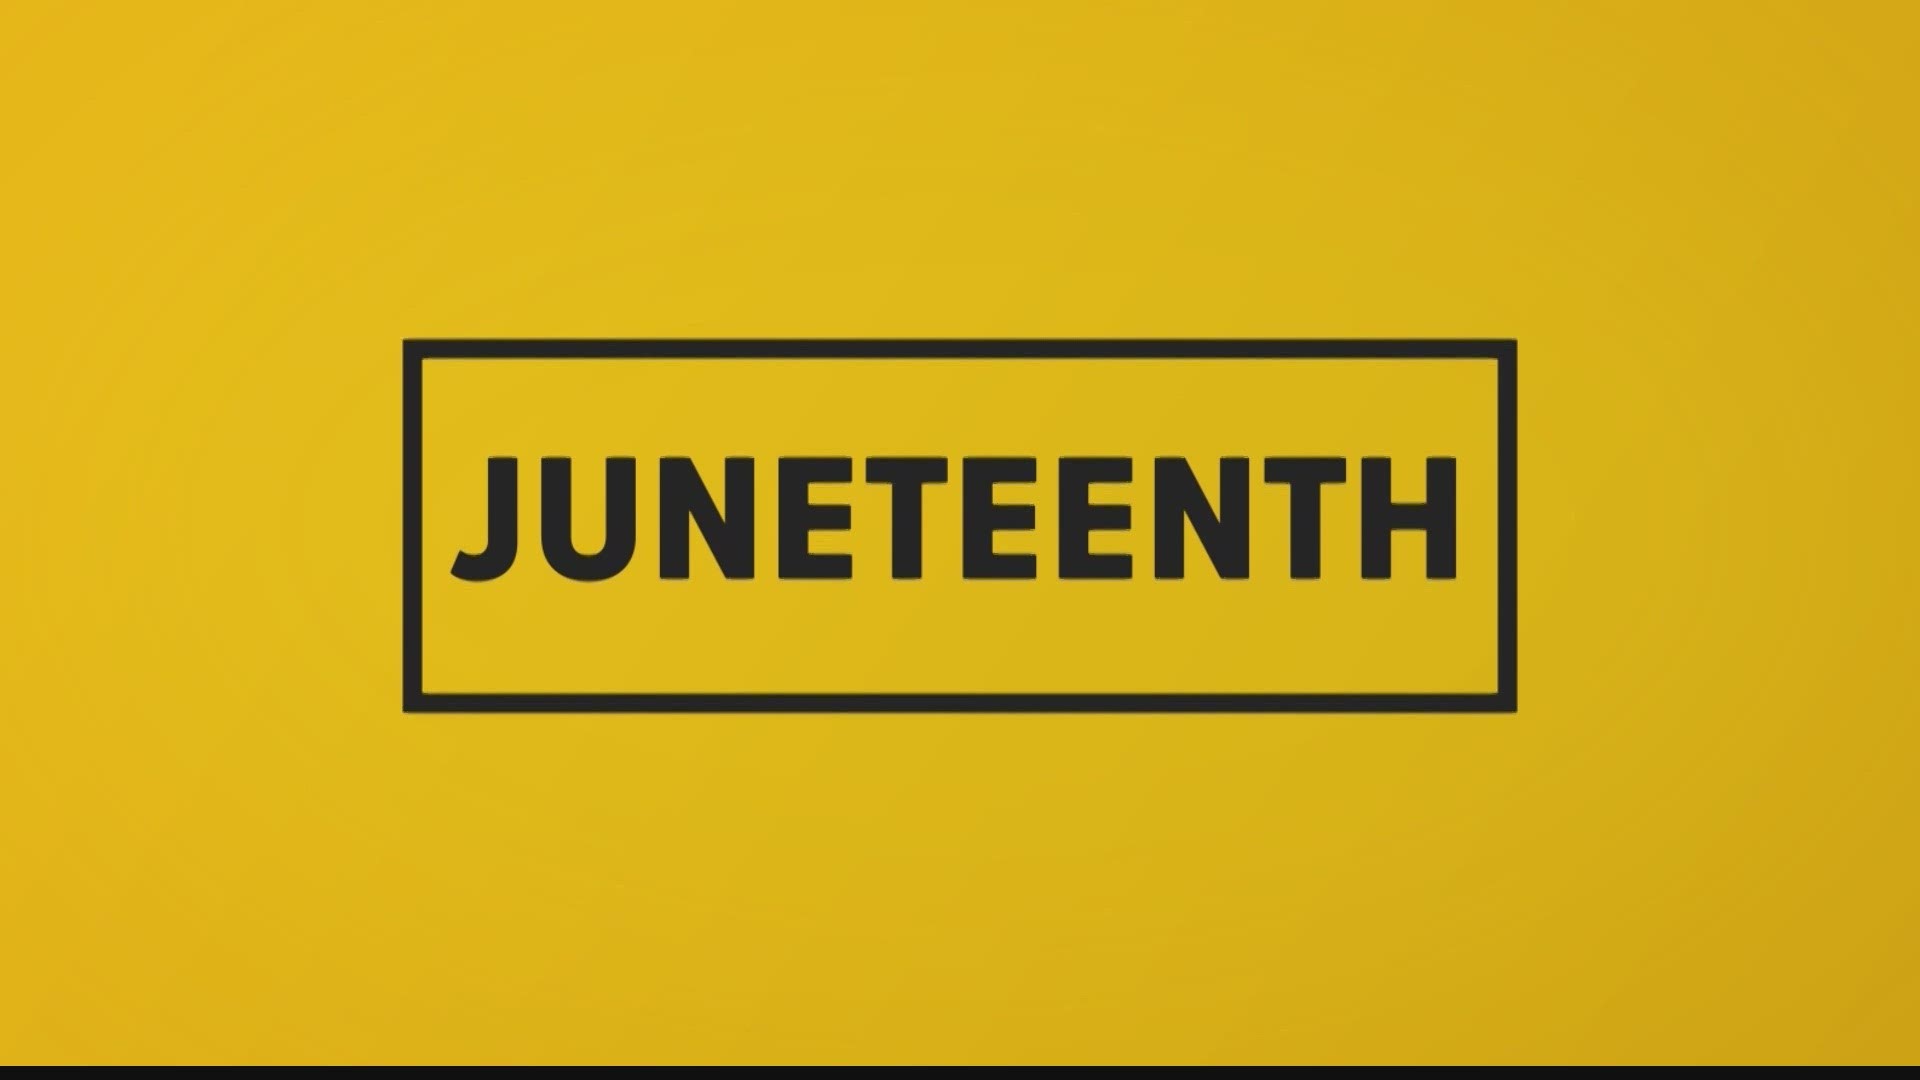 What is Juneteenth? It's a symbolic date representing African American freedom from slavery, and it's now a federal holiday.